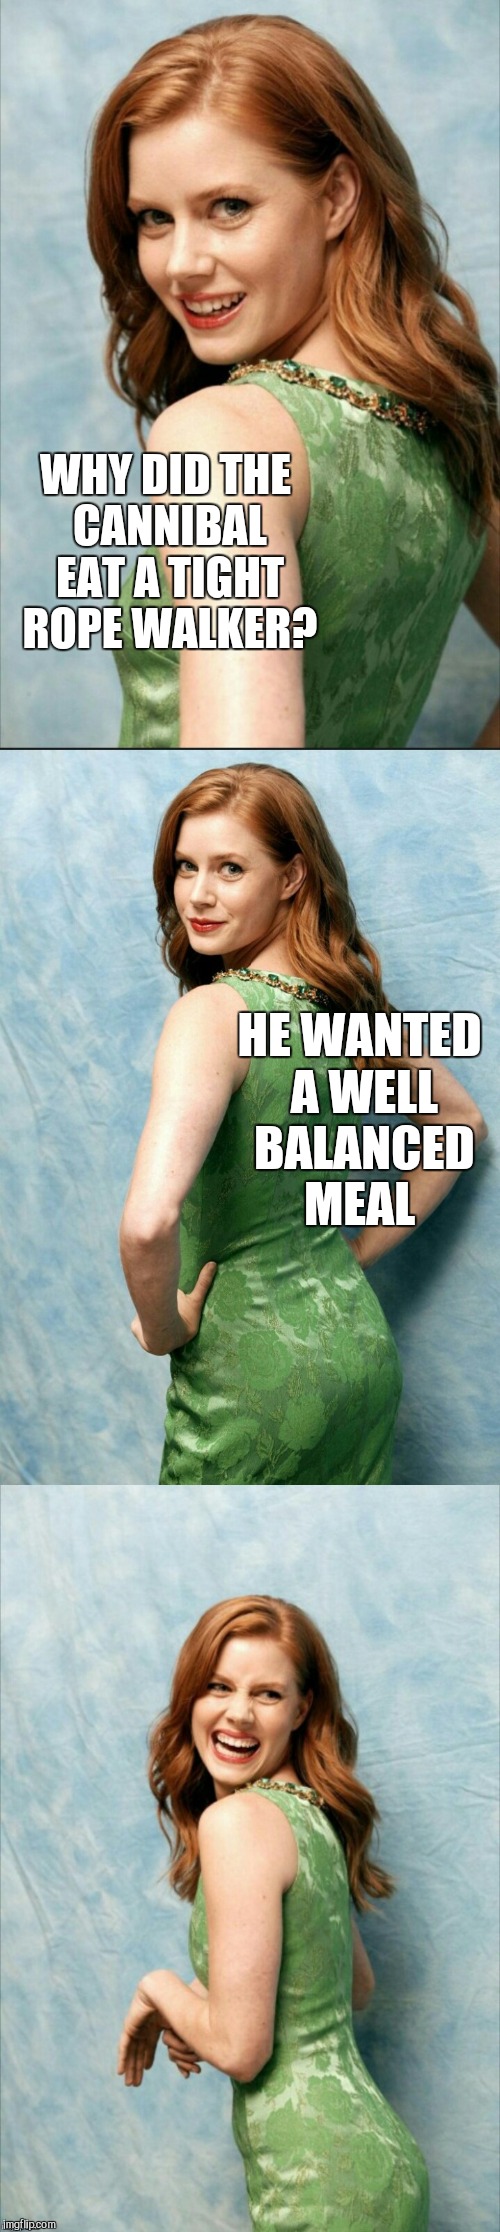 Amy Adams joke template  | WHY DID THE CANNIBAL EAT A TIGHT ROPE WALKER? HE WANTED A WELL BALANCED MEAL | image tagged in amy adams joke template,jbmemegeek,amy adams,cannibal,bad puns | made w/ Imgflip meme maker